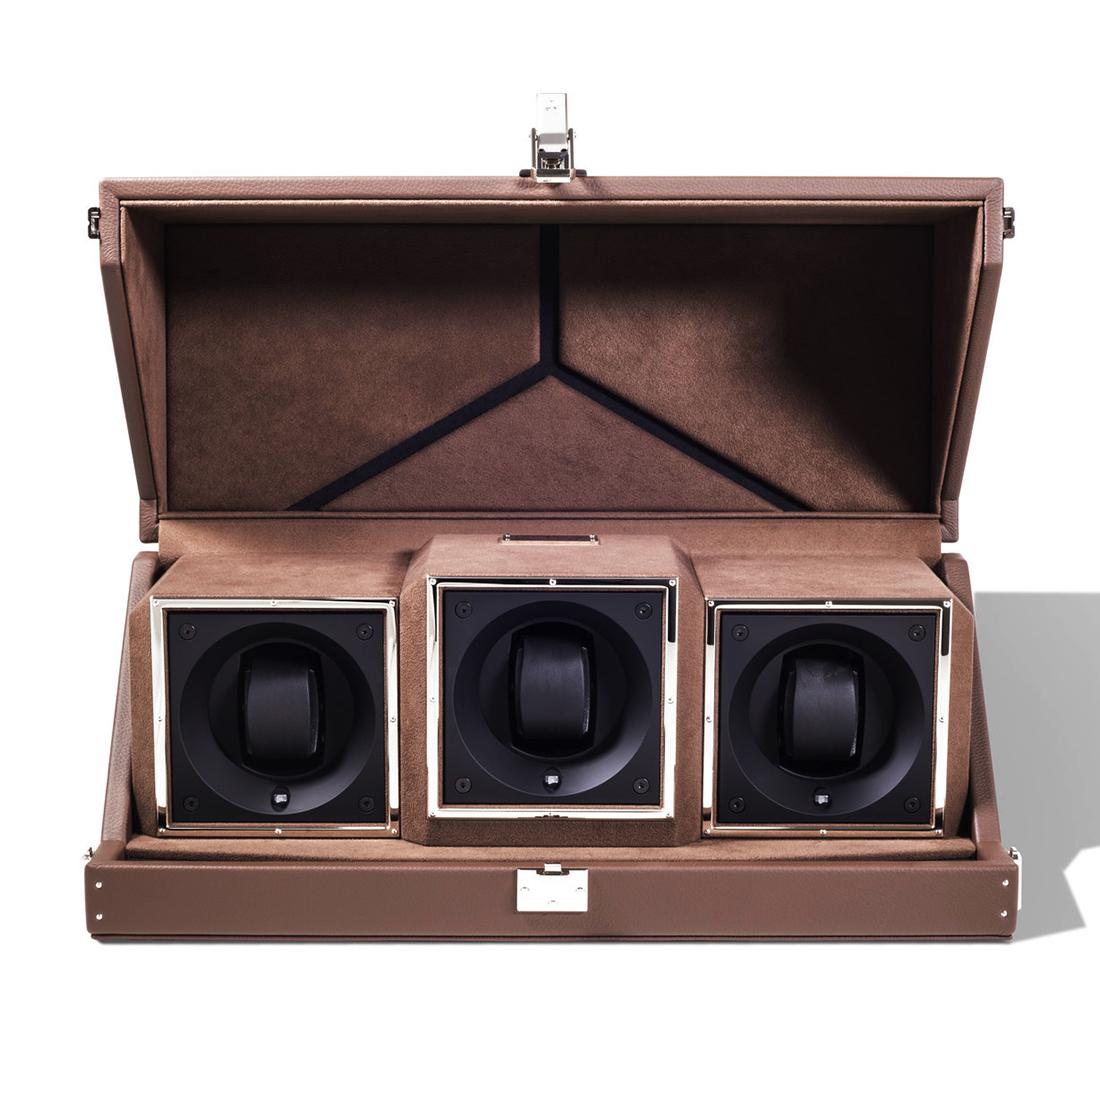 Box triple Luxwatch brown covered with brown
grained cowhide leather. With jewelry parts in solid brass,
with hand polished nickel-plated. With bottom feet in hand-
polished and nickel plated solid brass.
Padding and lining in brown slate